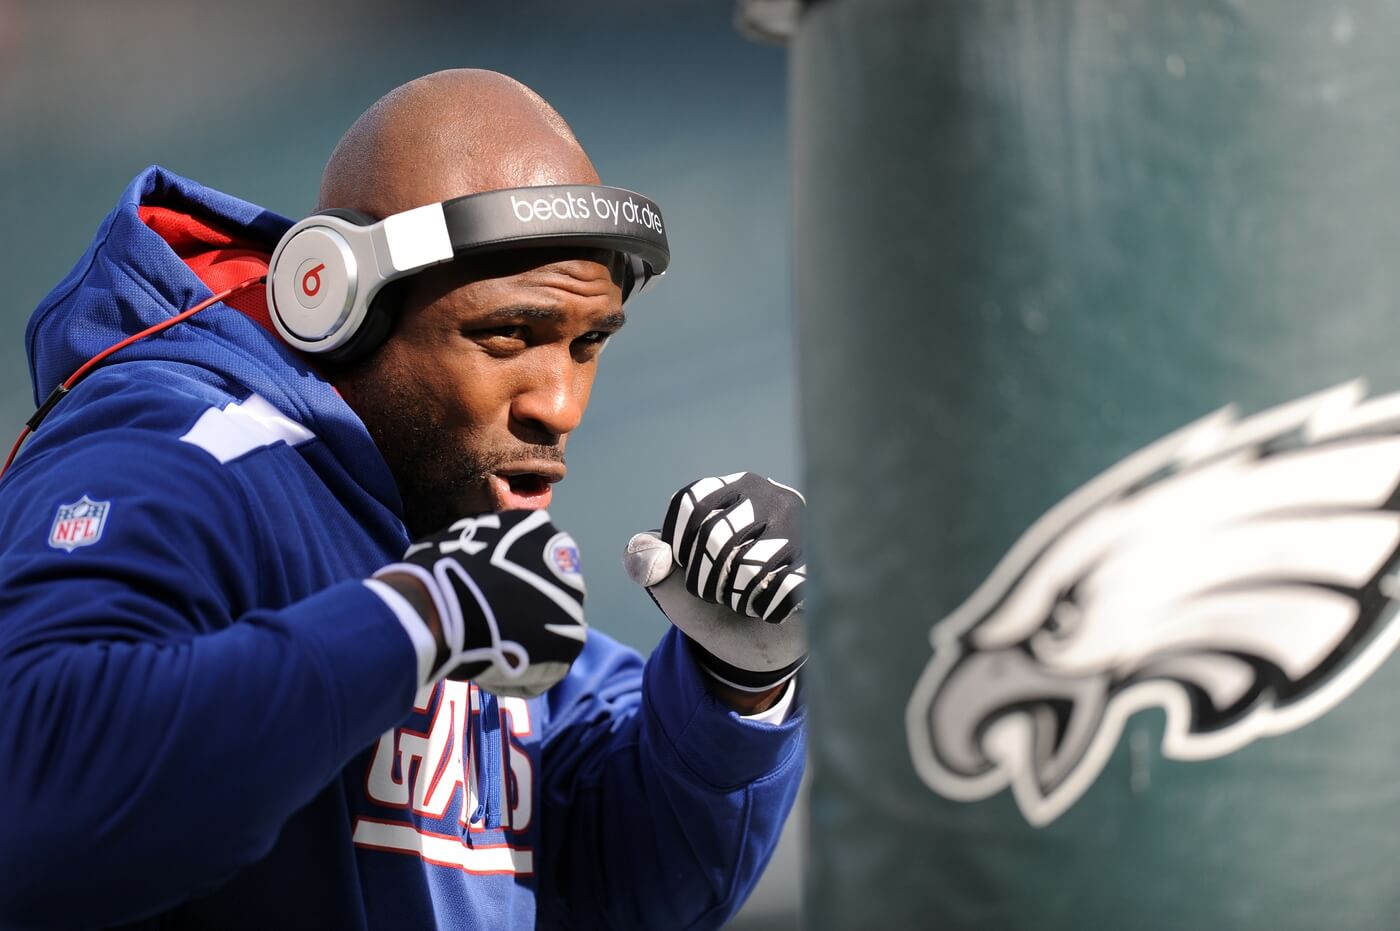 Oct 27, 2013; Philadelphia, PA, USA; New York Giants running back Brandon Jacobs (34) boxes a Philadelphia Eagles goal post pad during pre-game warmups at Lincoln Financial Field. Mandatory Credit: Joe Camporeale-USA TODAY Sports